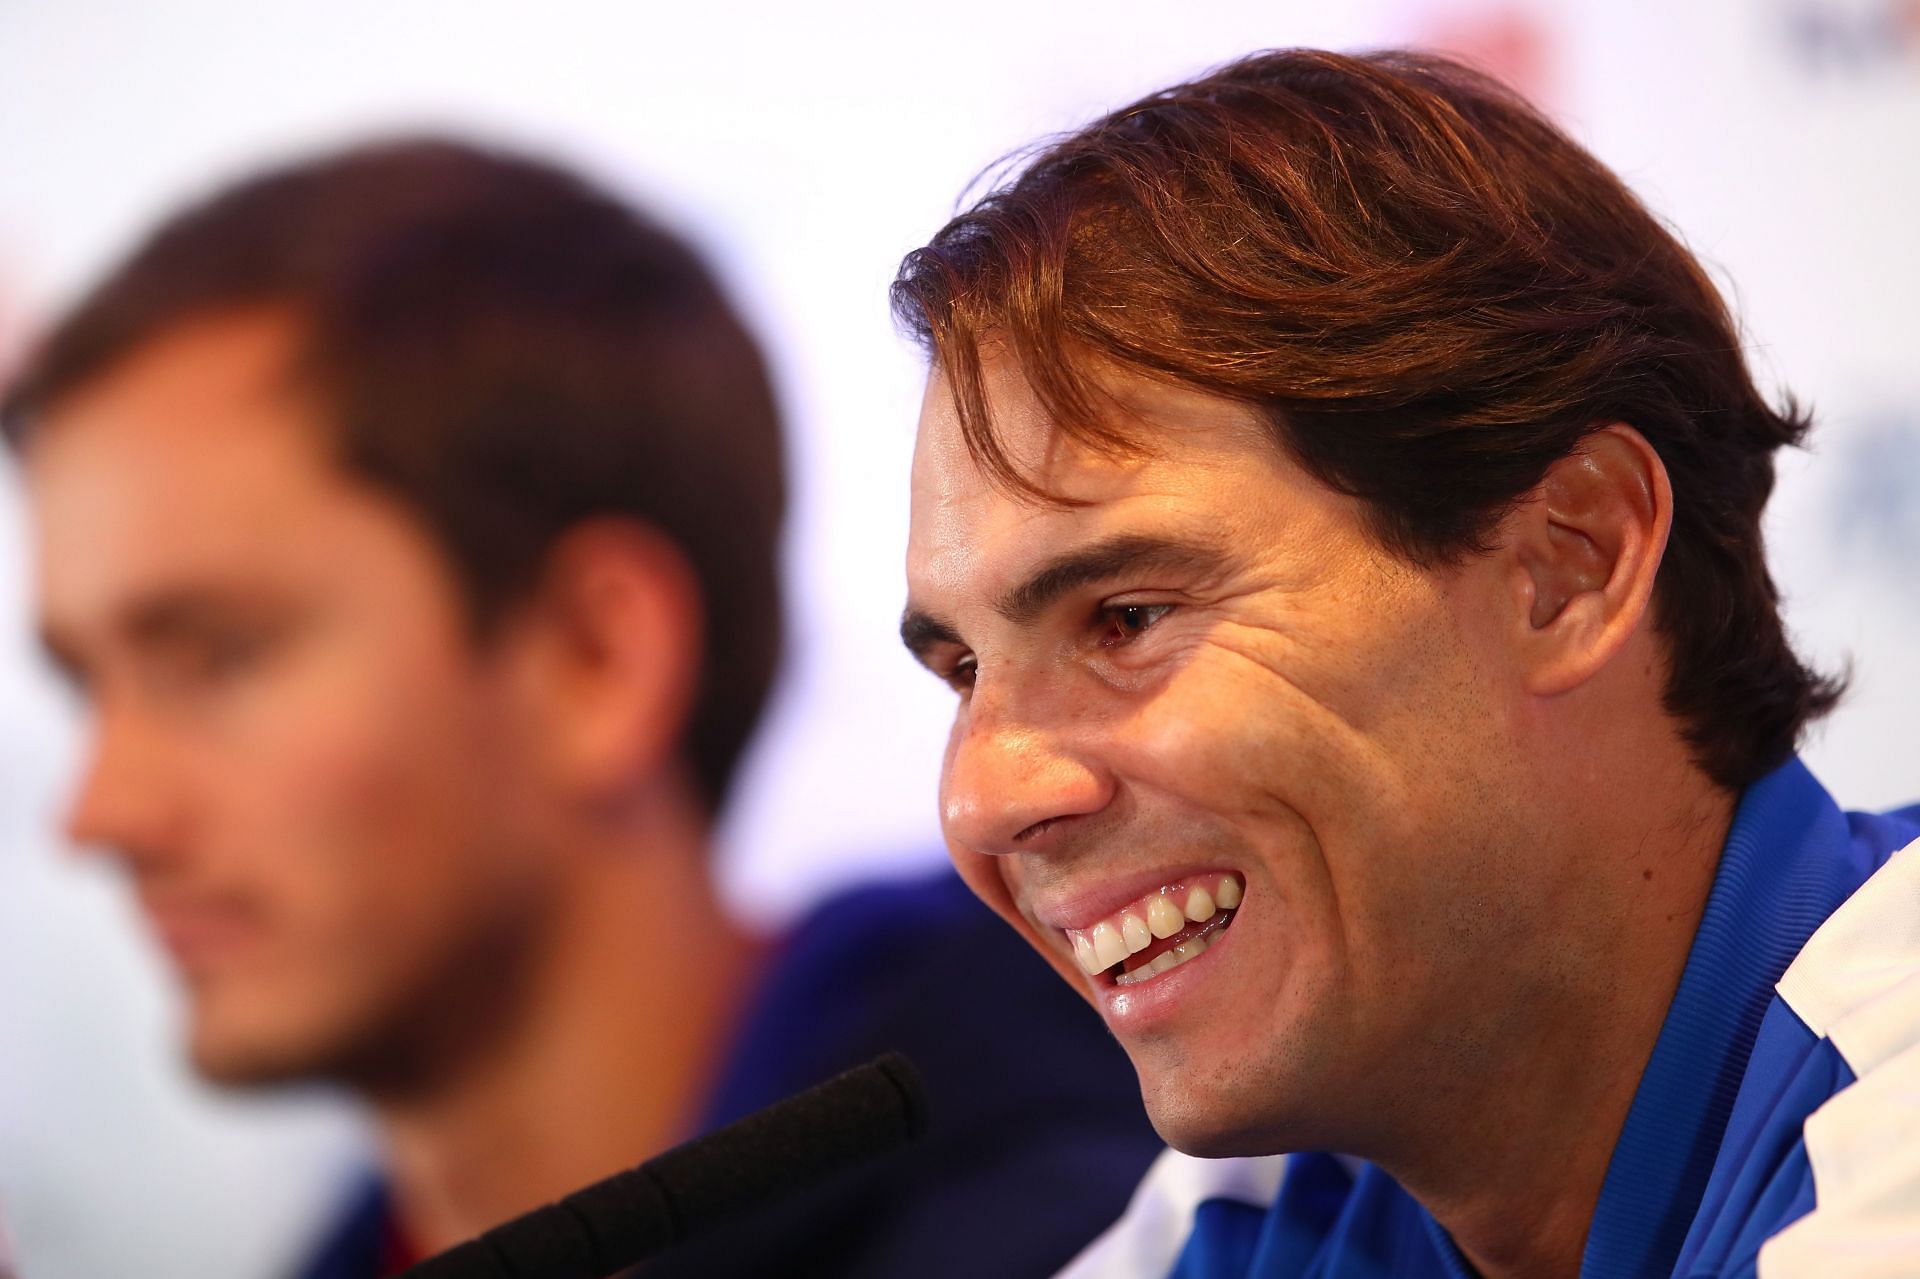 Rafael Nadal speaking to members of the media ahead of the 2019 Nitto ATP Finals